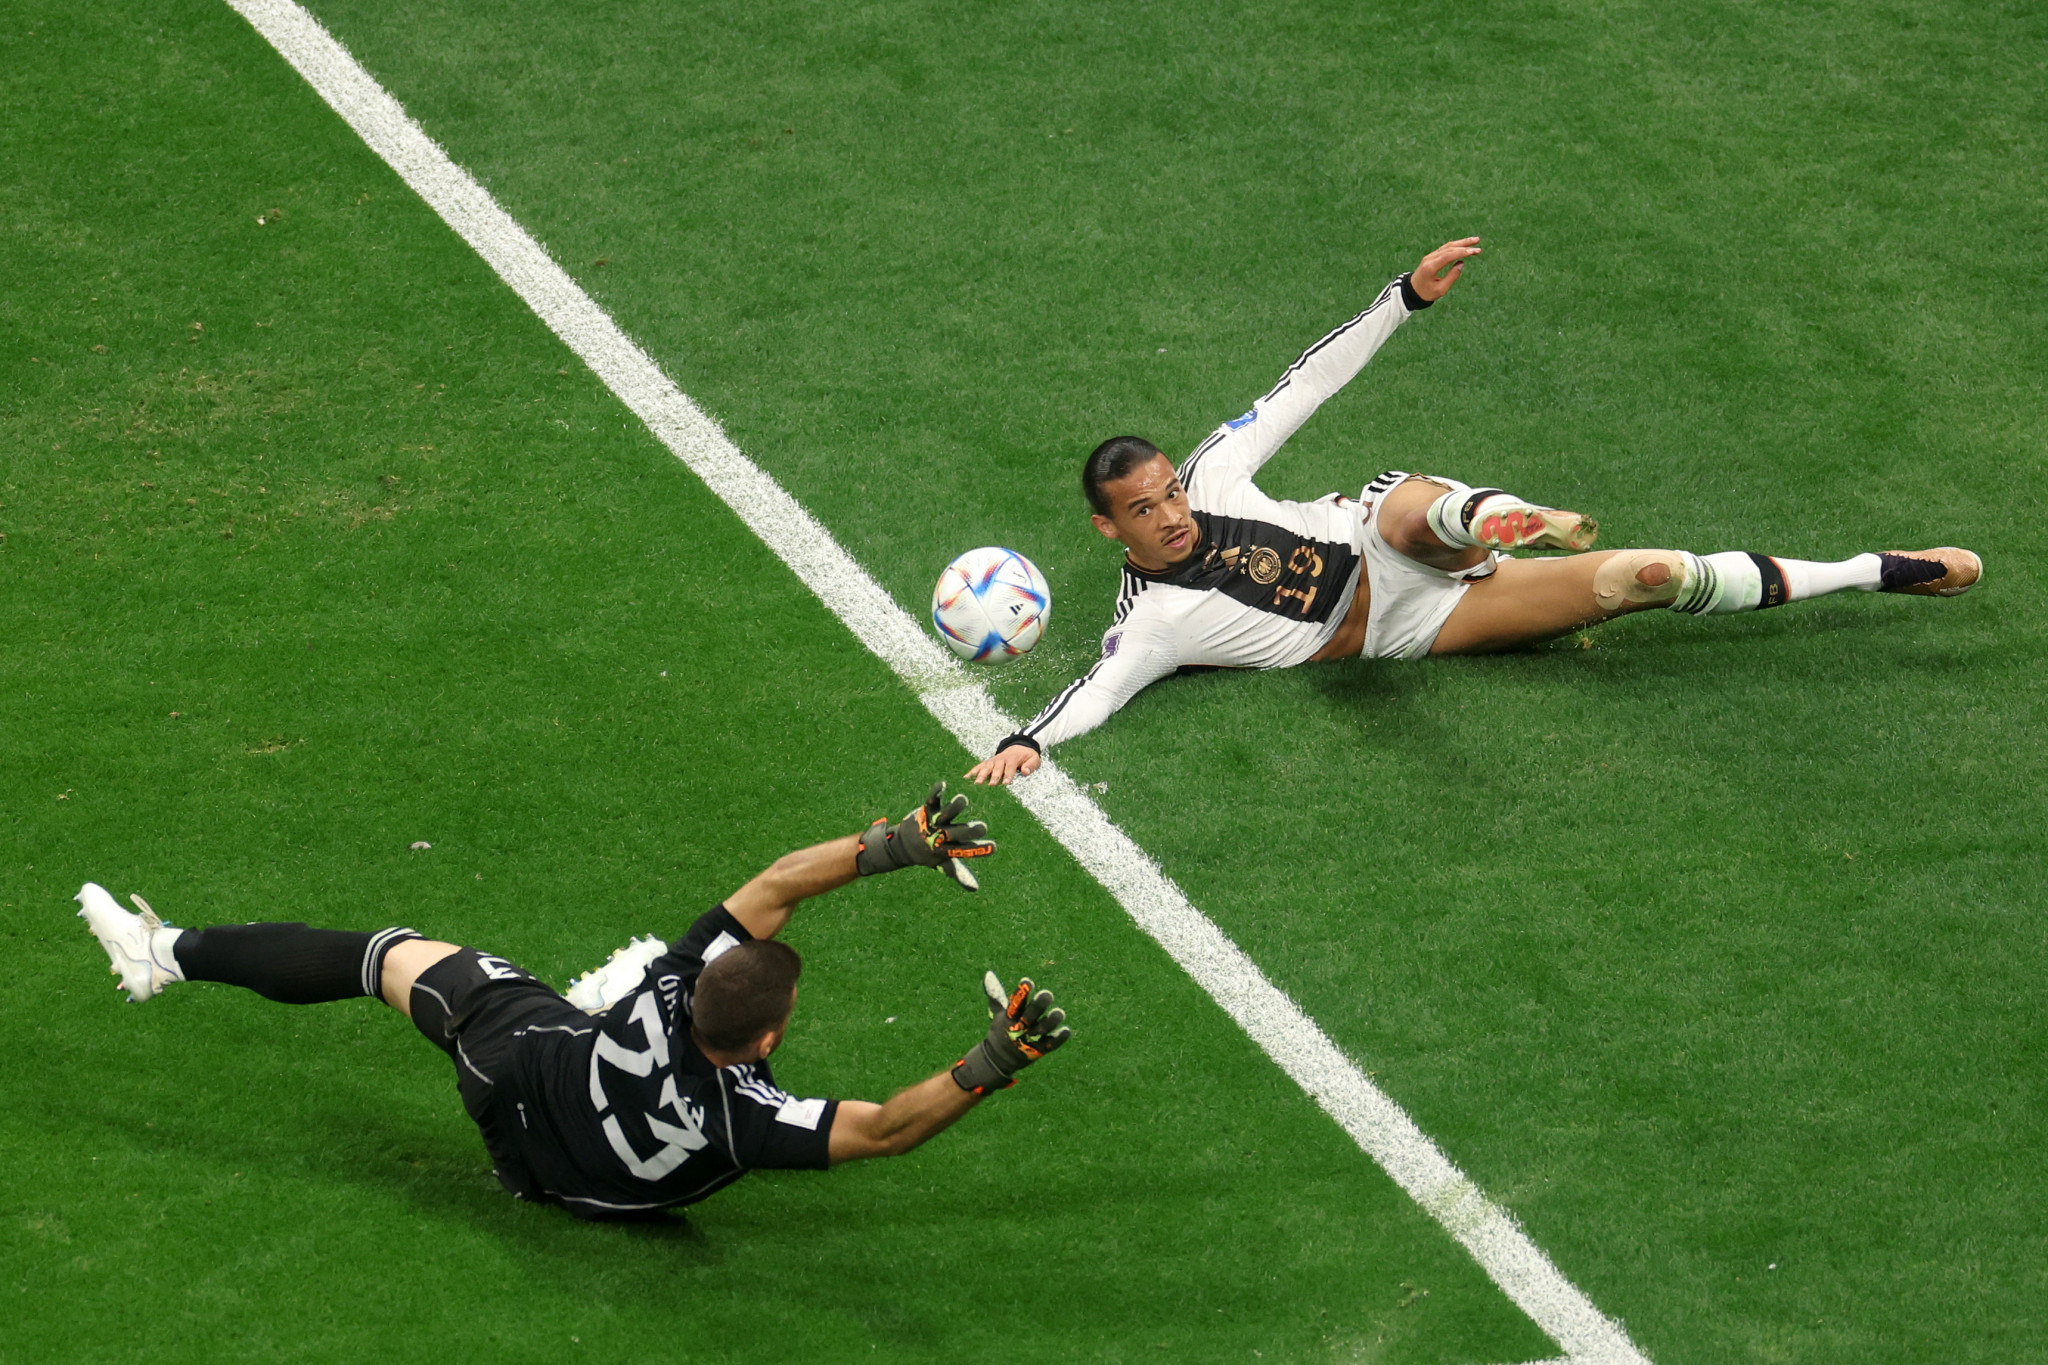 Spain and Germany was one of the most eagerly-anticipated matches during the group phase of the World Cup ©Getty Images